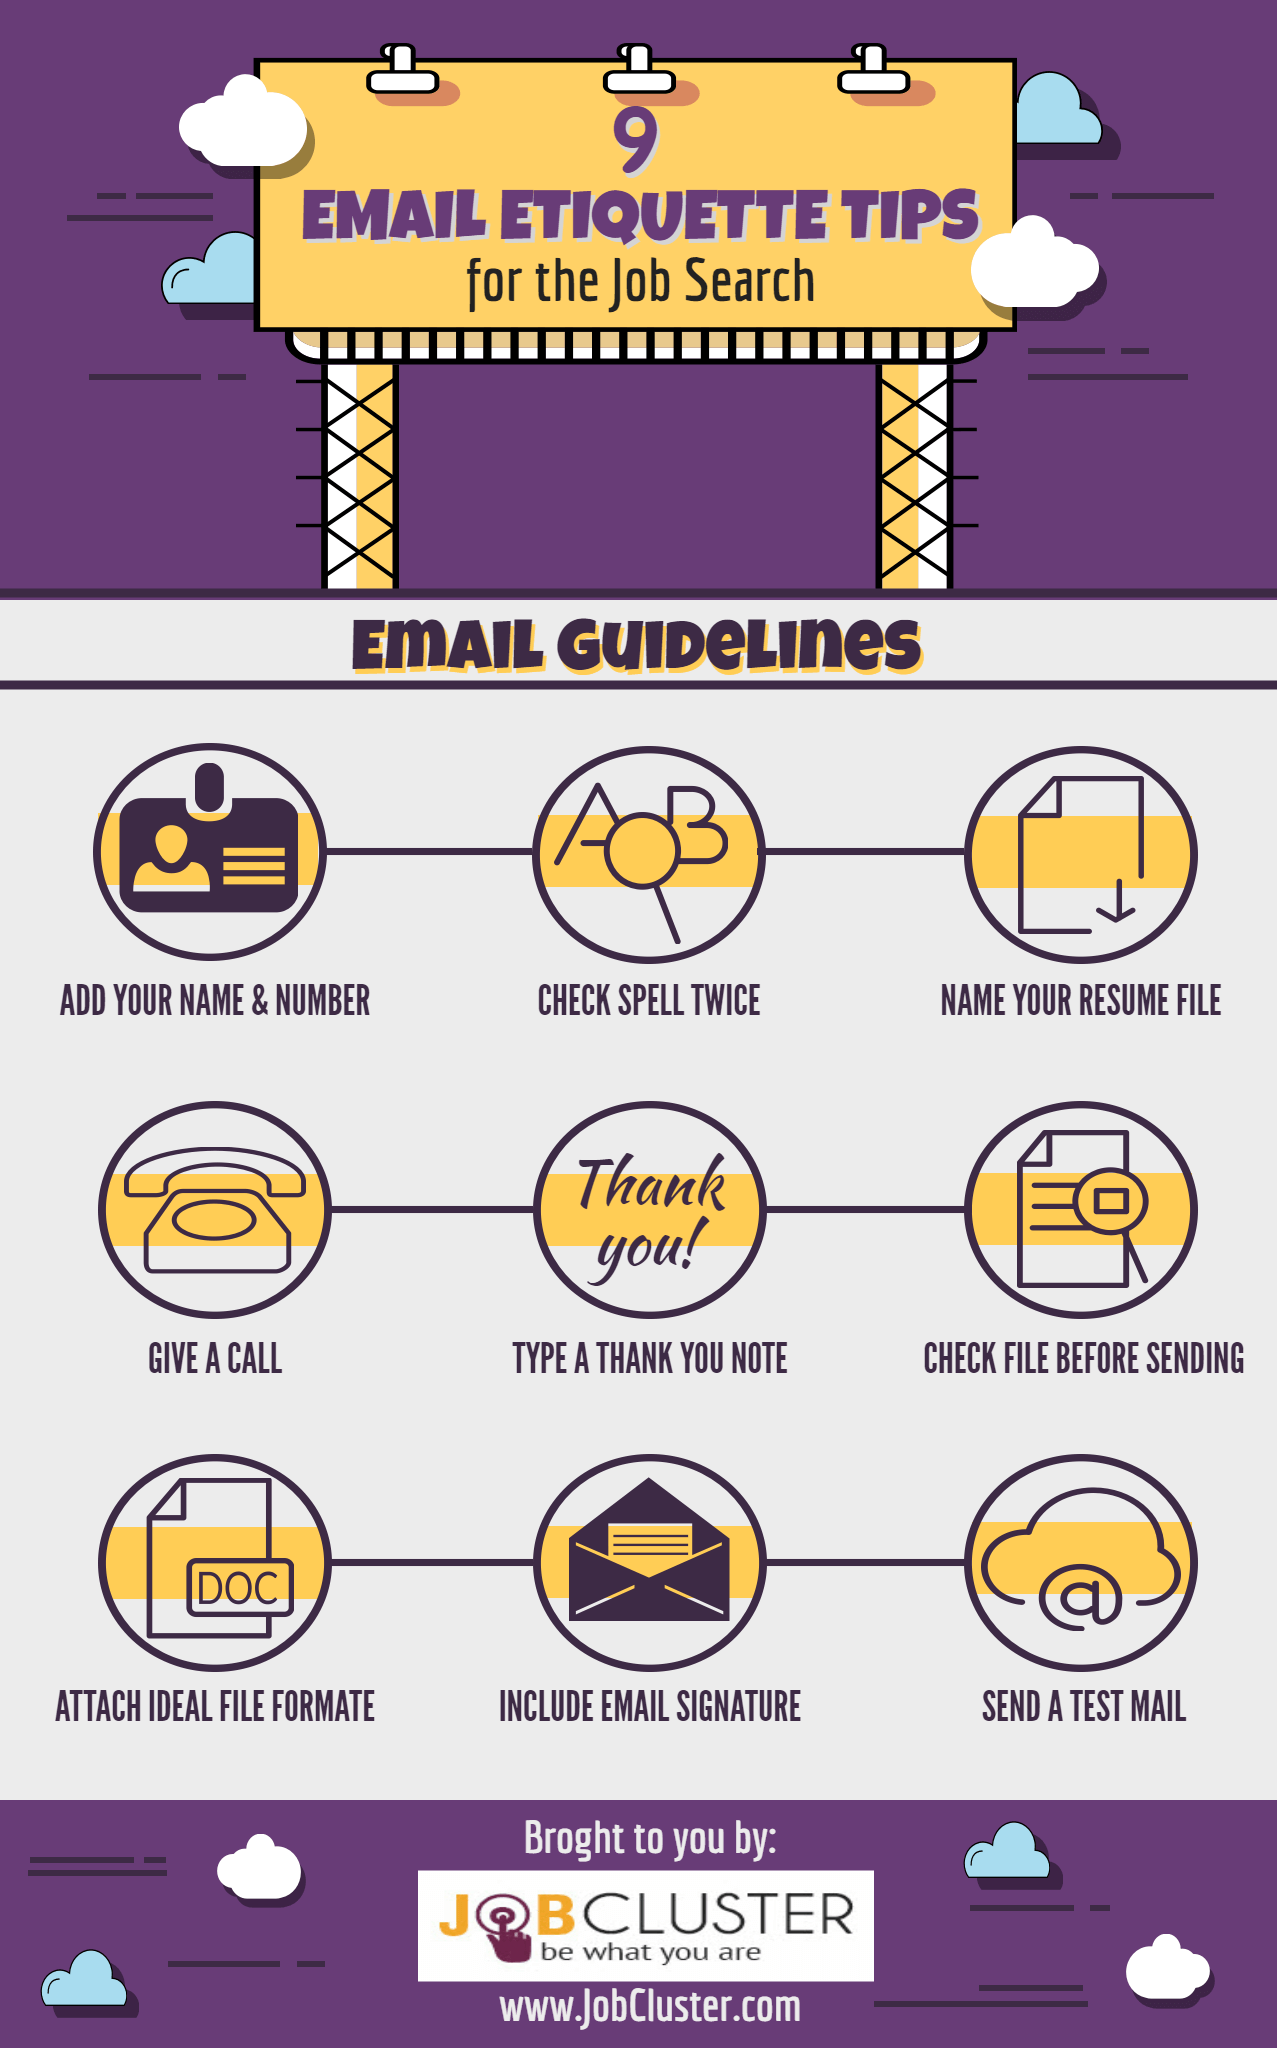 Email Etiquette Tips for Job Seekers- Infographic